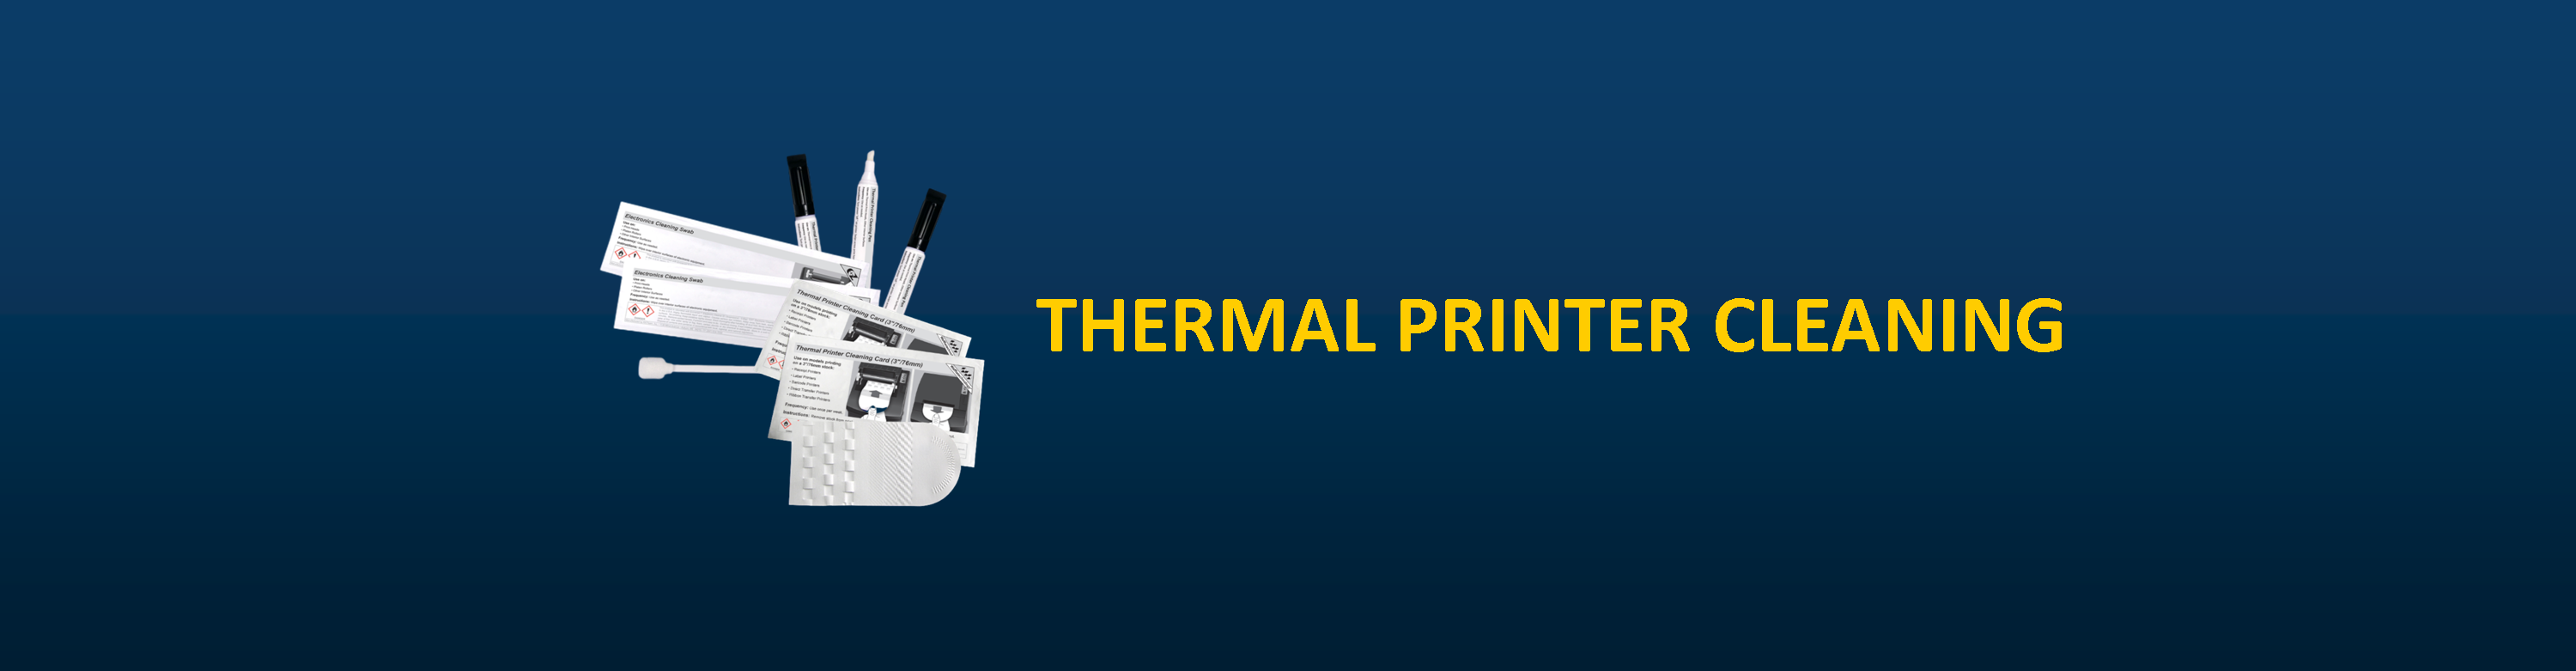 Thermal Printer Cleaning